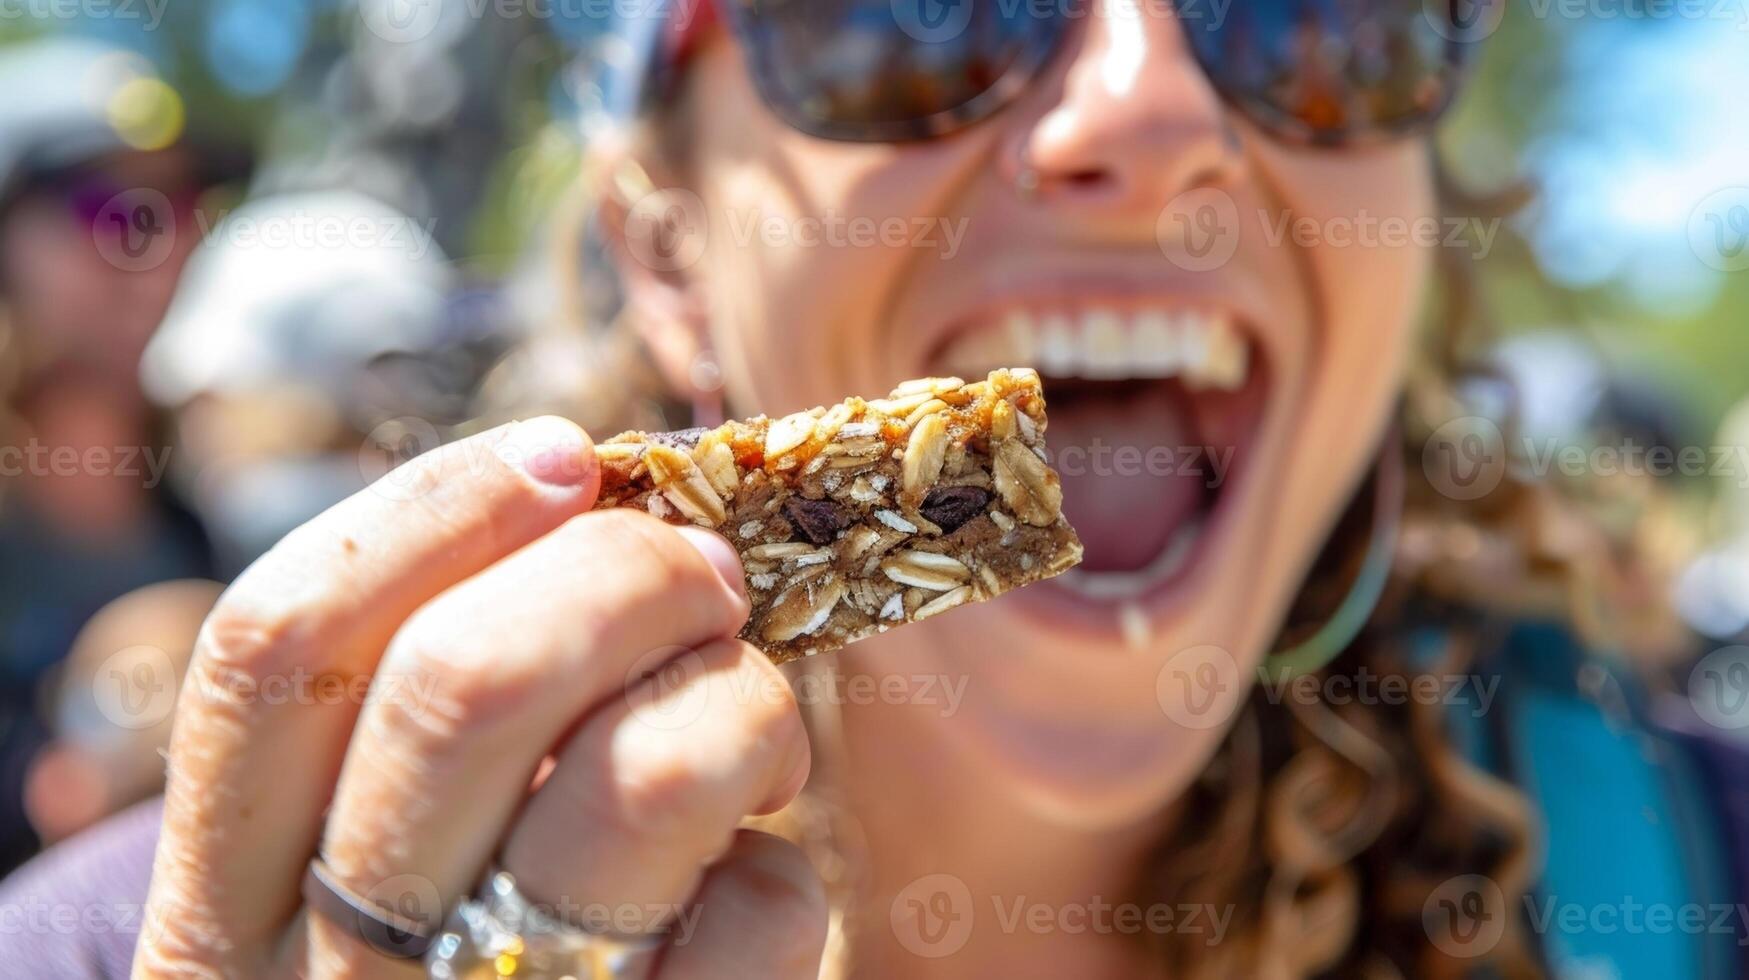 As one customer raves about the gingerberry blend another takes a bite out of their homemade energy bar photo